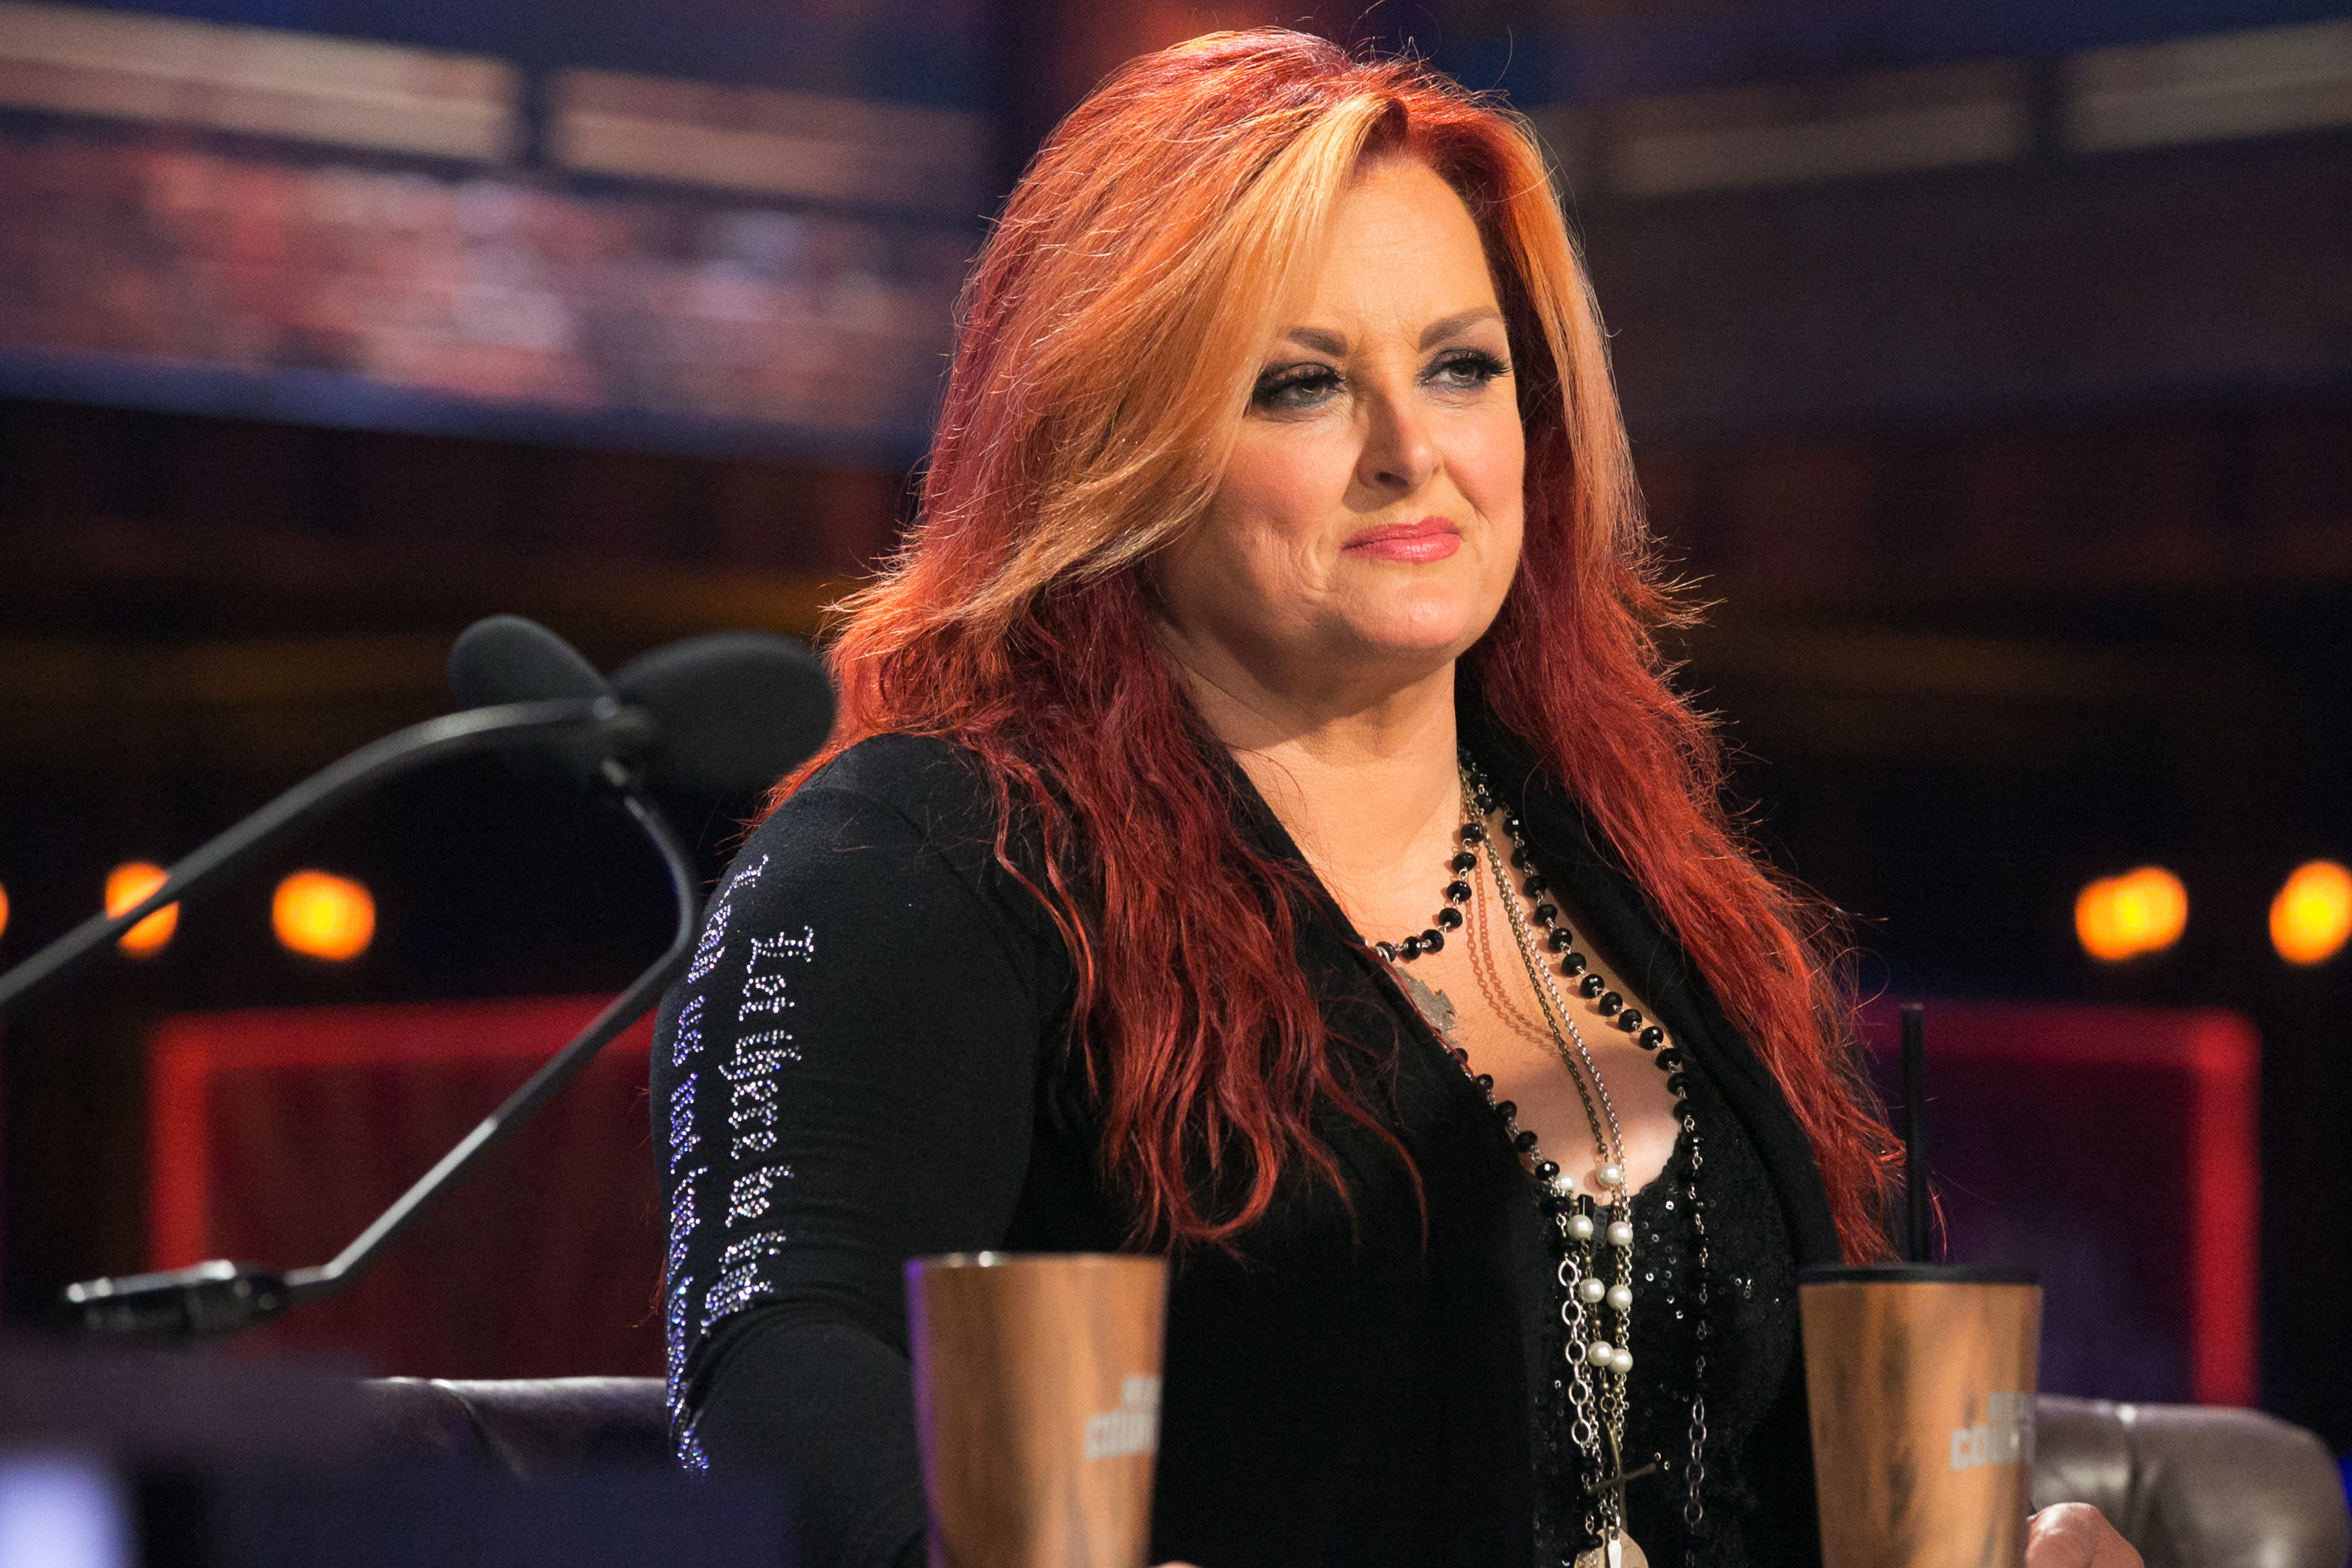 Wynonna Judd on REAL COUNTRY Season 1 - "Hitting the Road" Episode 102 | Source: Getty Images